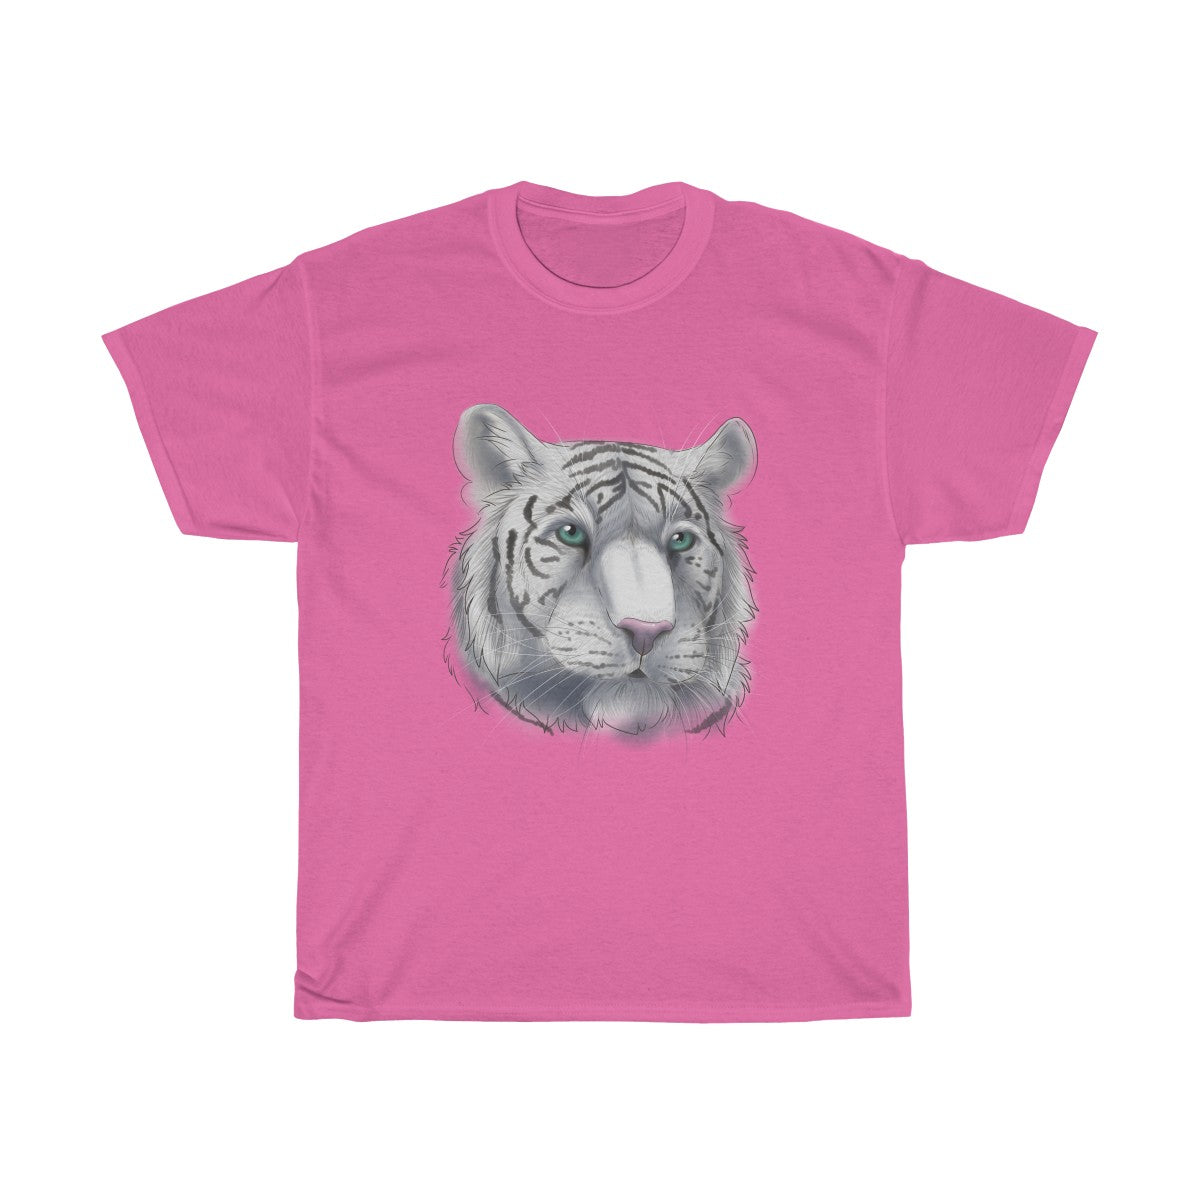 White Tiger - T-Shirt T-Shirt Dire Creatures Pink S 